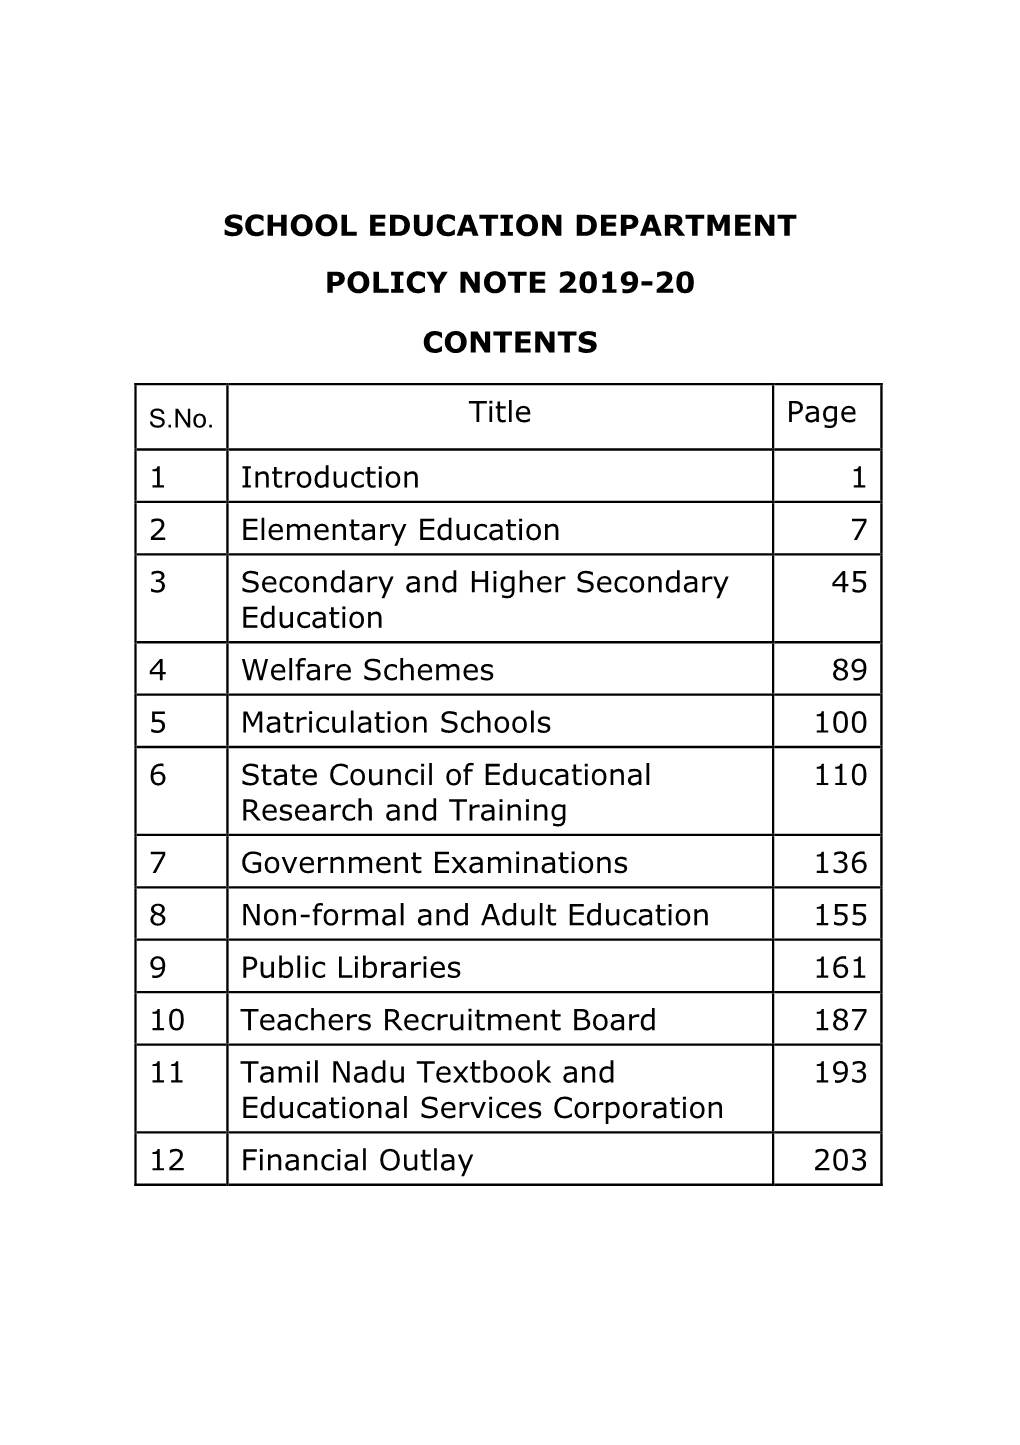 School Education Department Policy Note 2019-20